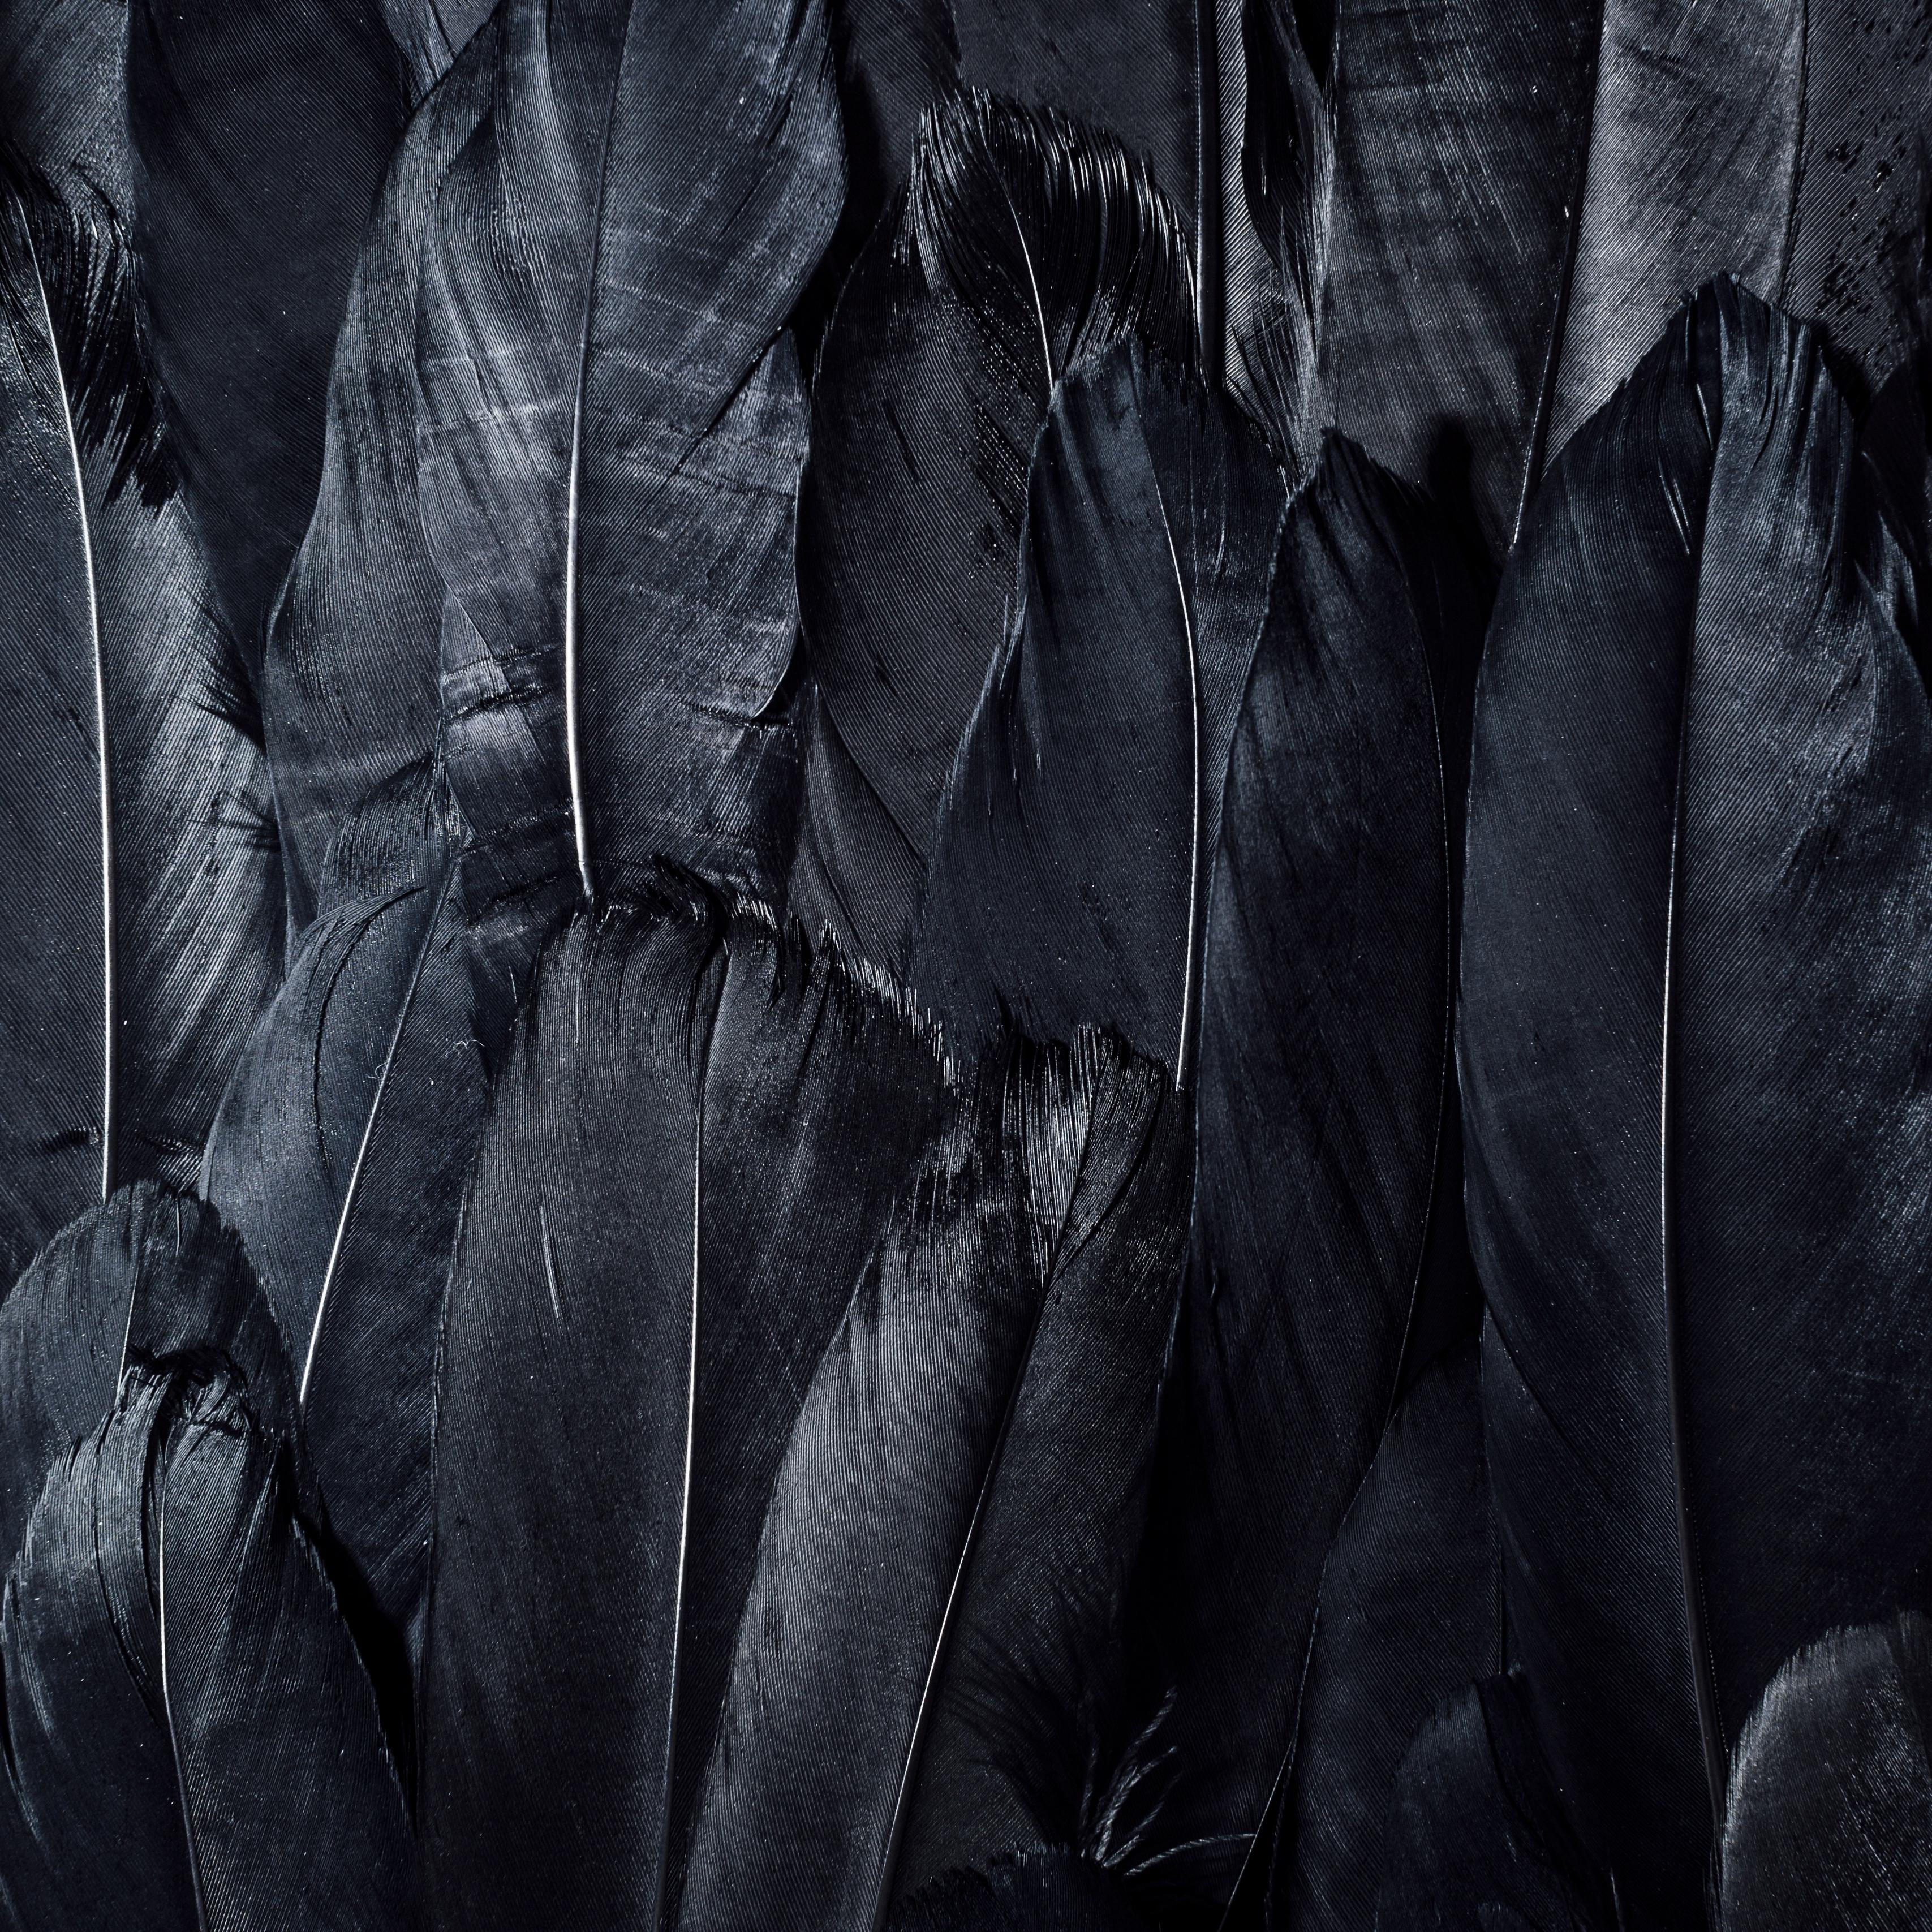 Black Feathers Wallpapers